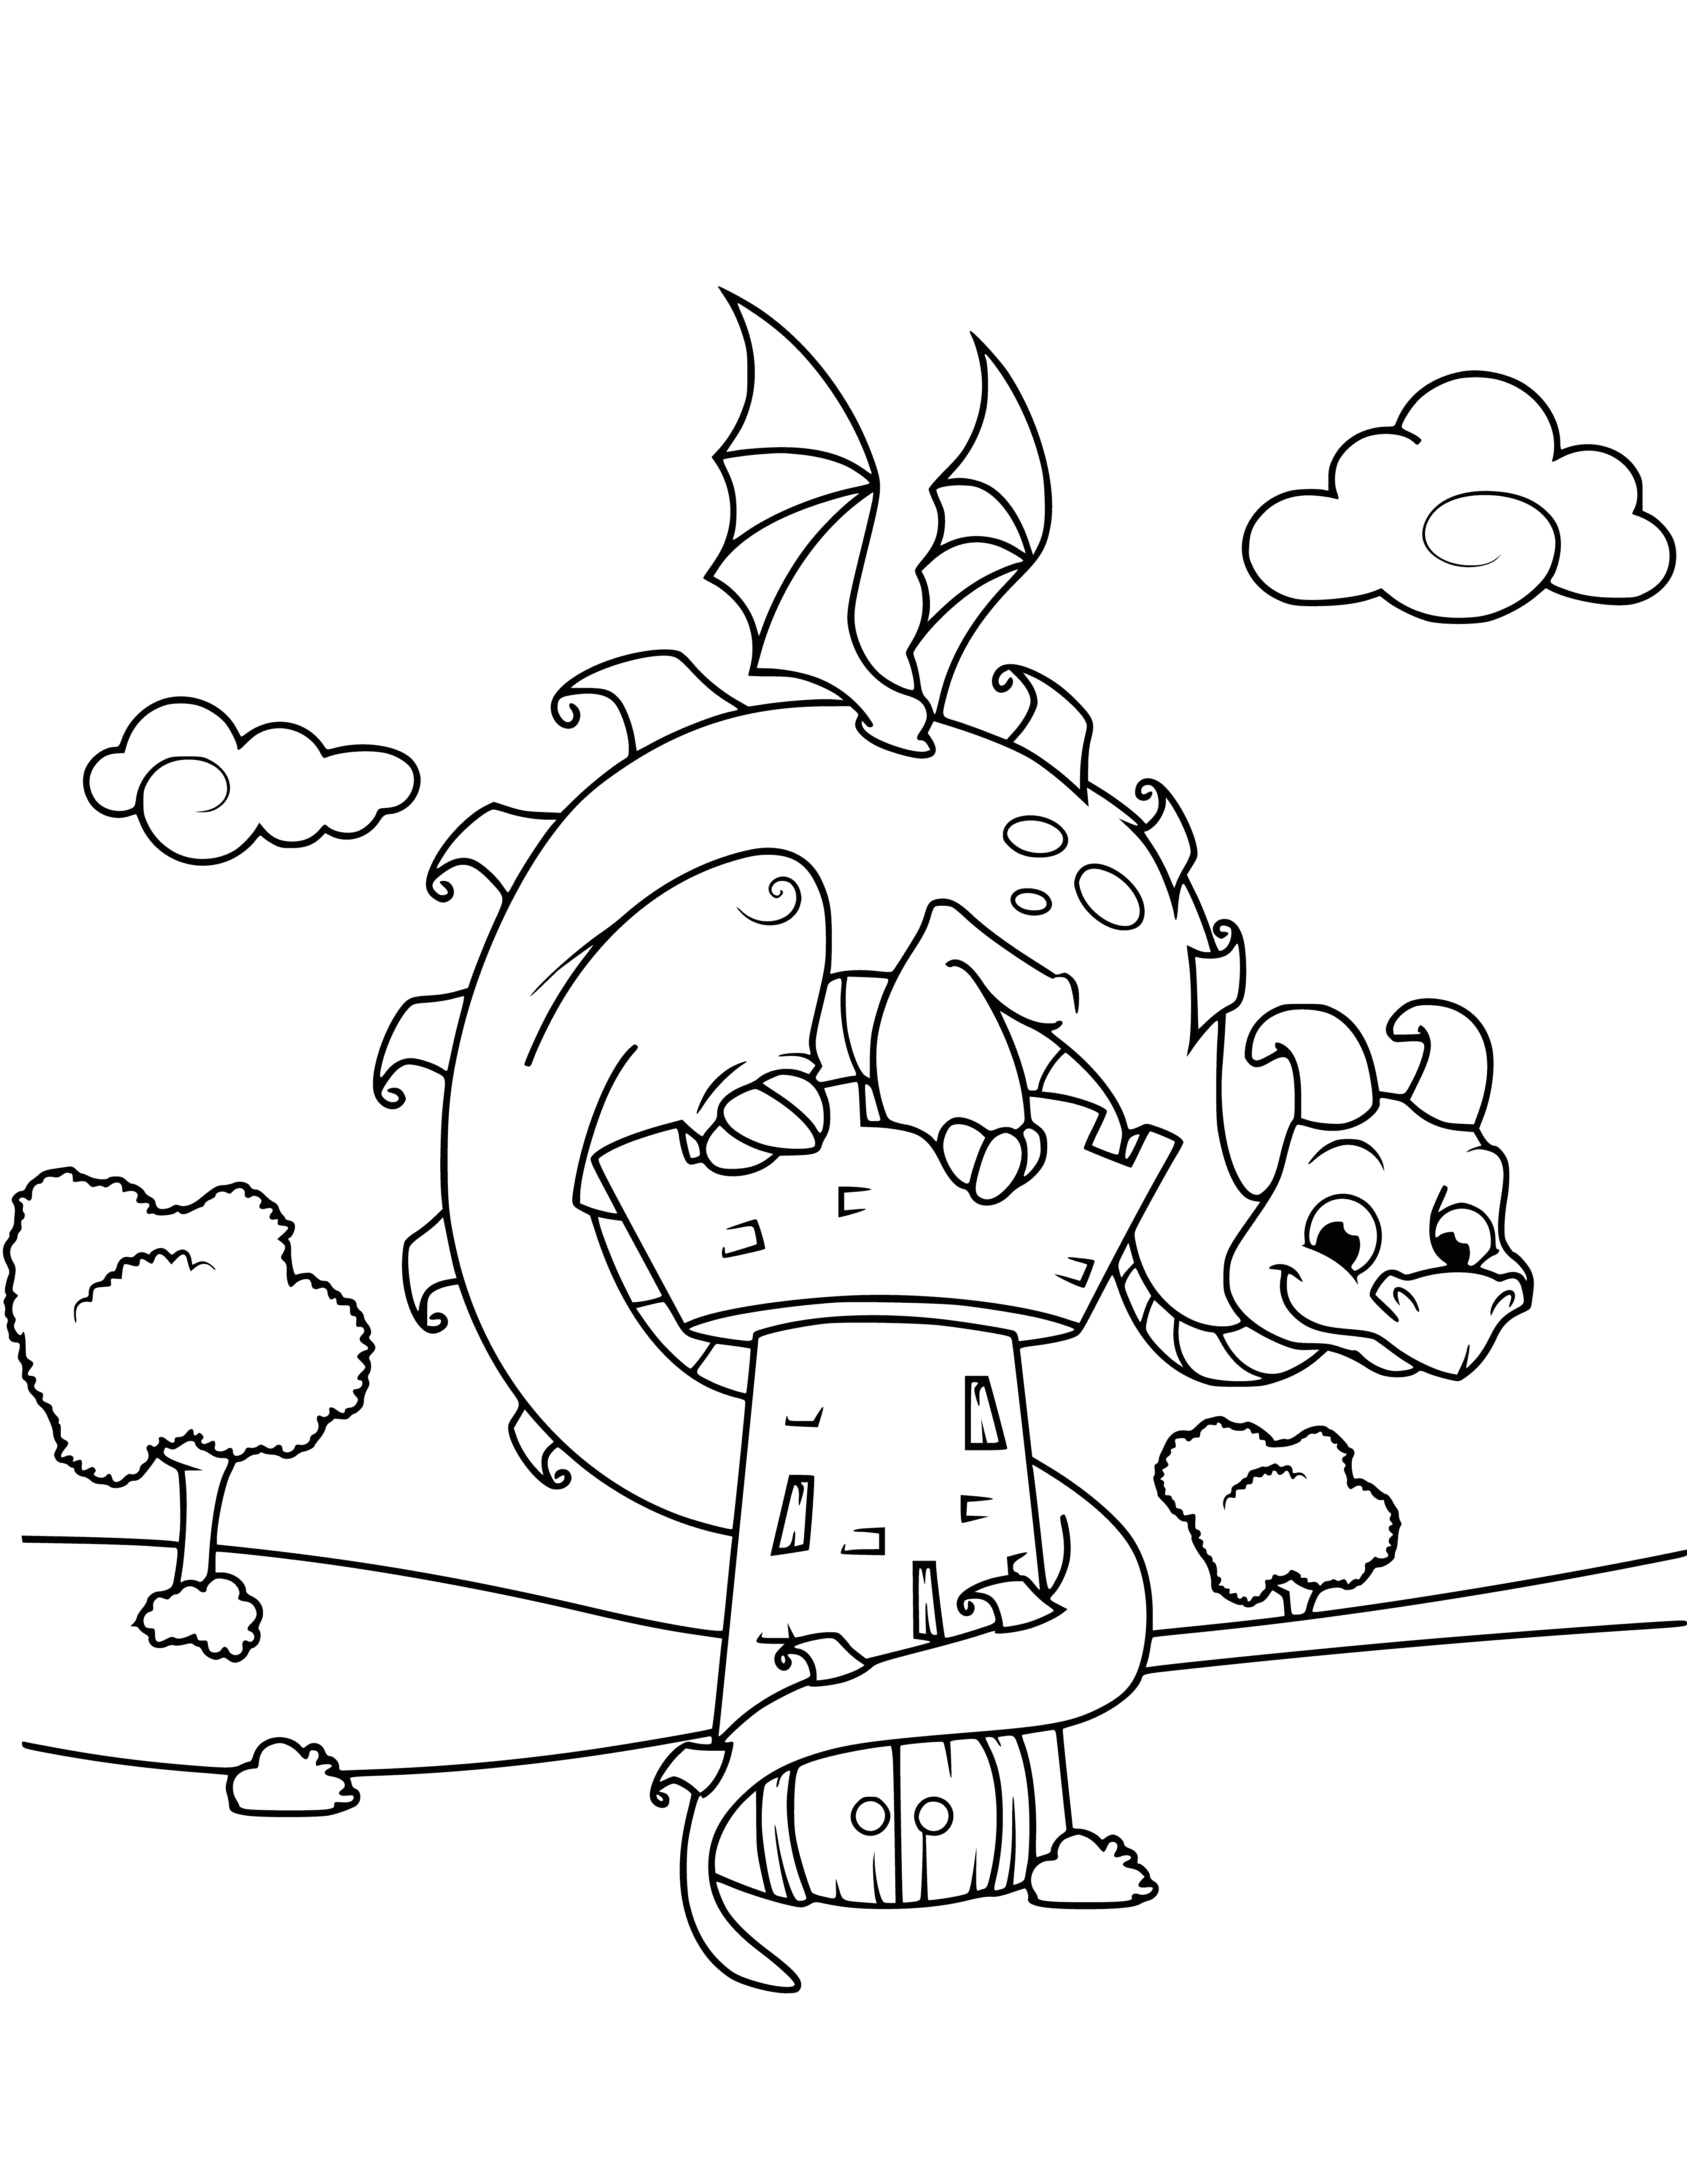 coloring page: Mythical dragon sits on castle, guarding it with fiery power - a coloring page perfect for dragon fans!